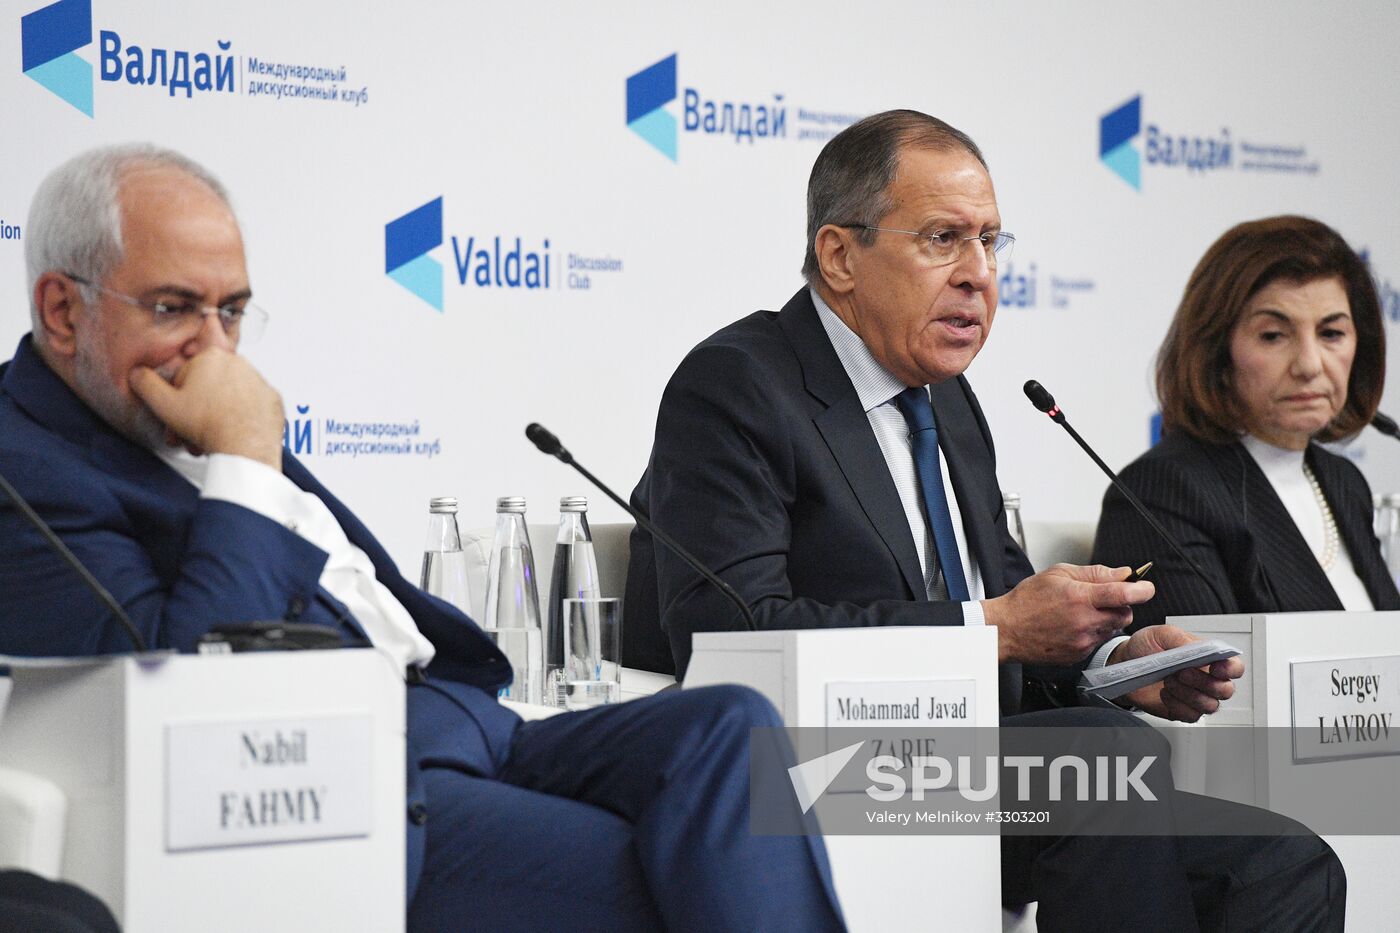 Conference 'Russia in the Middle East: Playing on all fields'